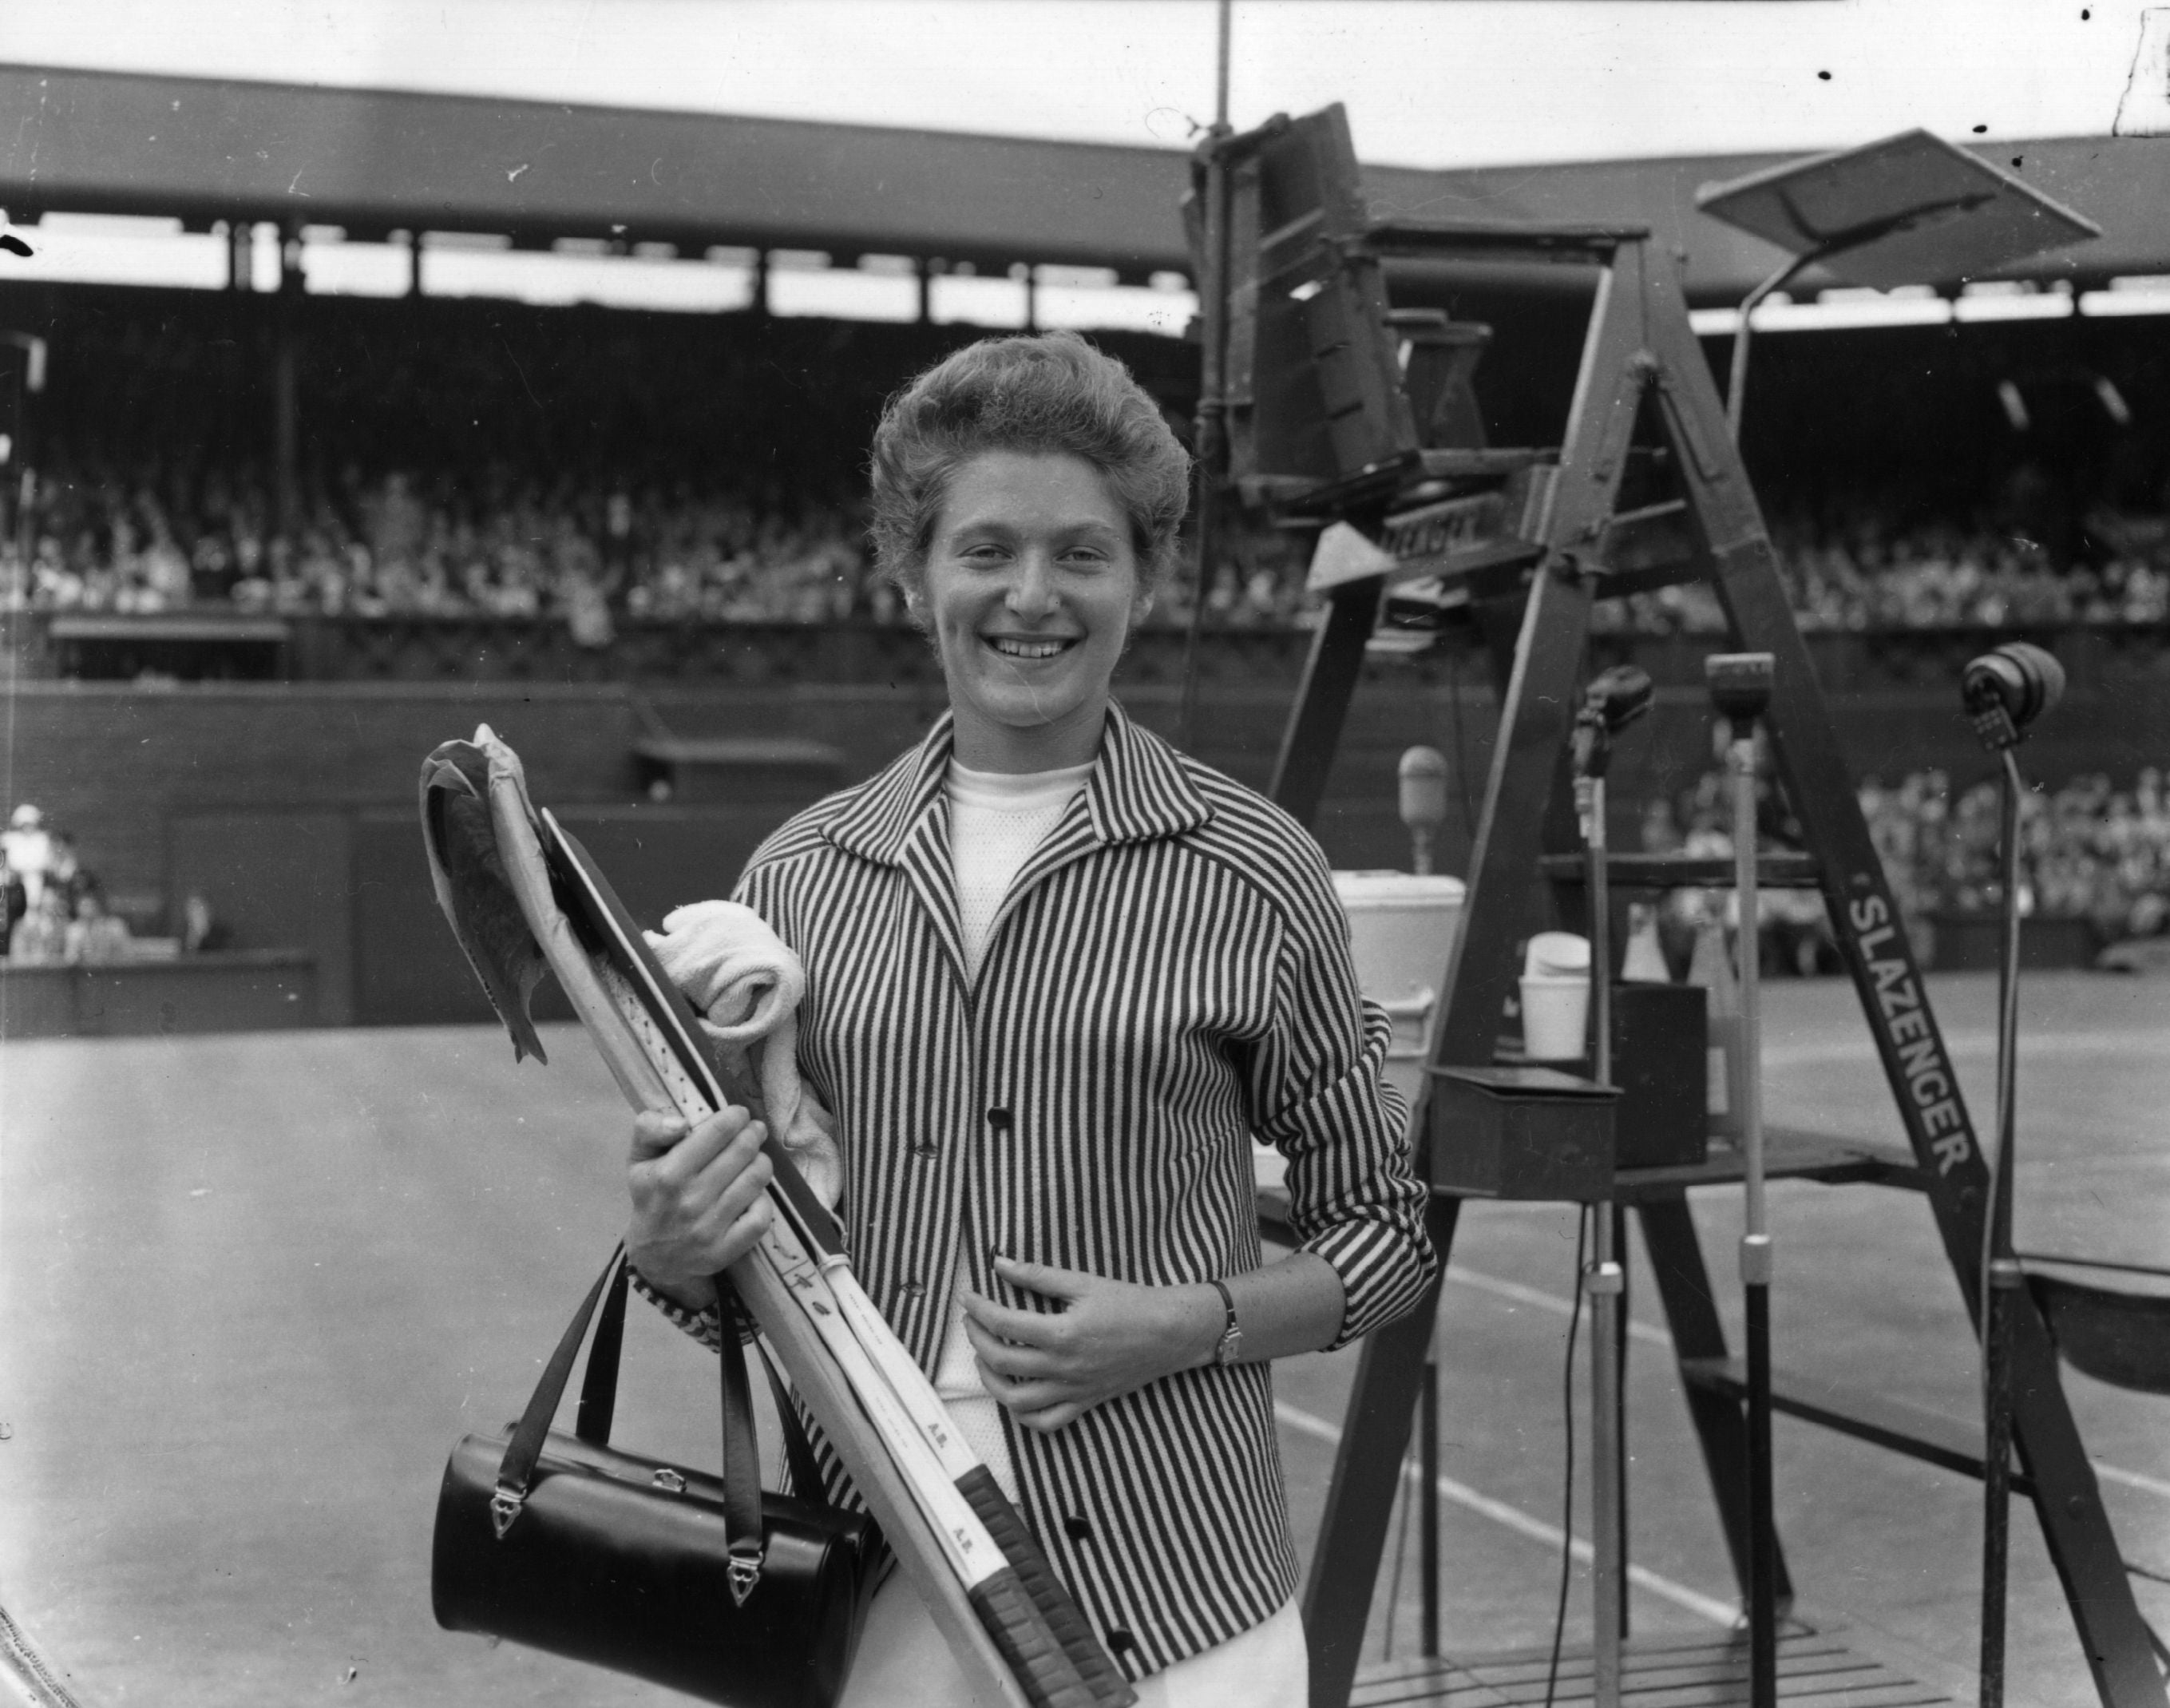 At Wimbledon before playing in the women’s singles final in 1956